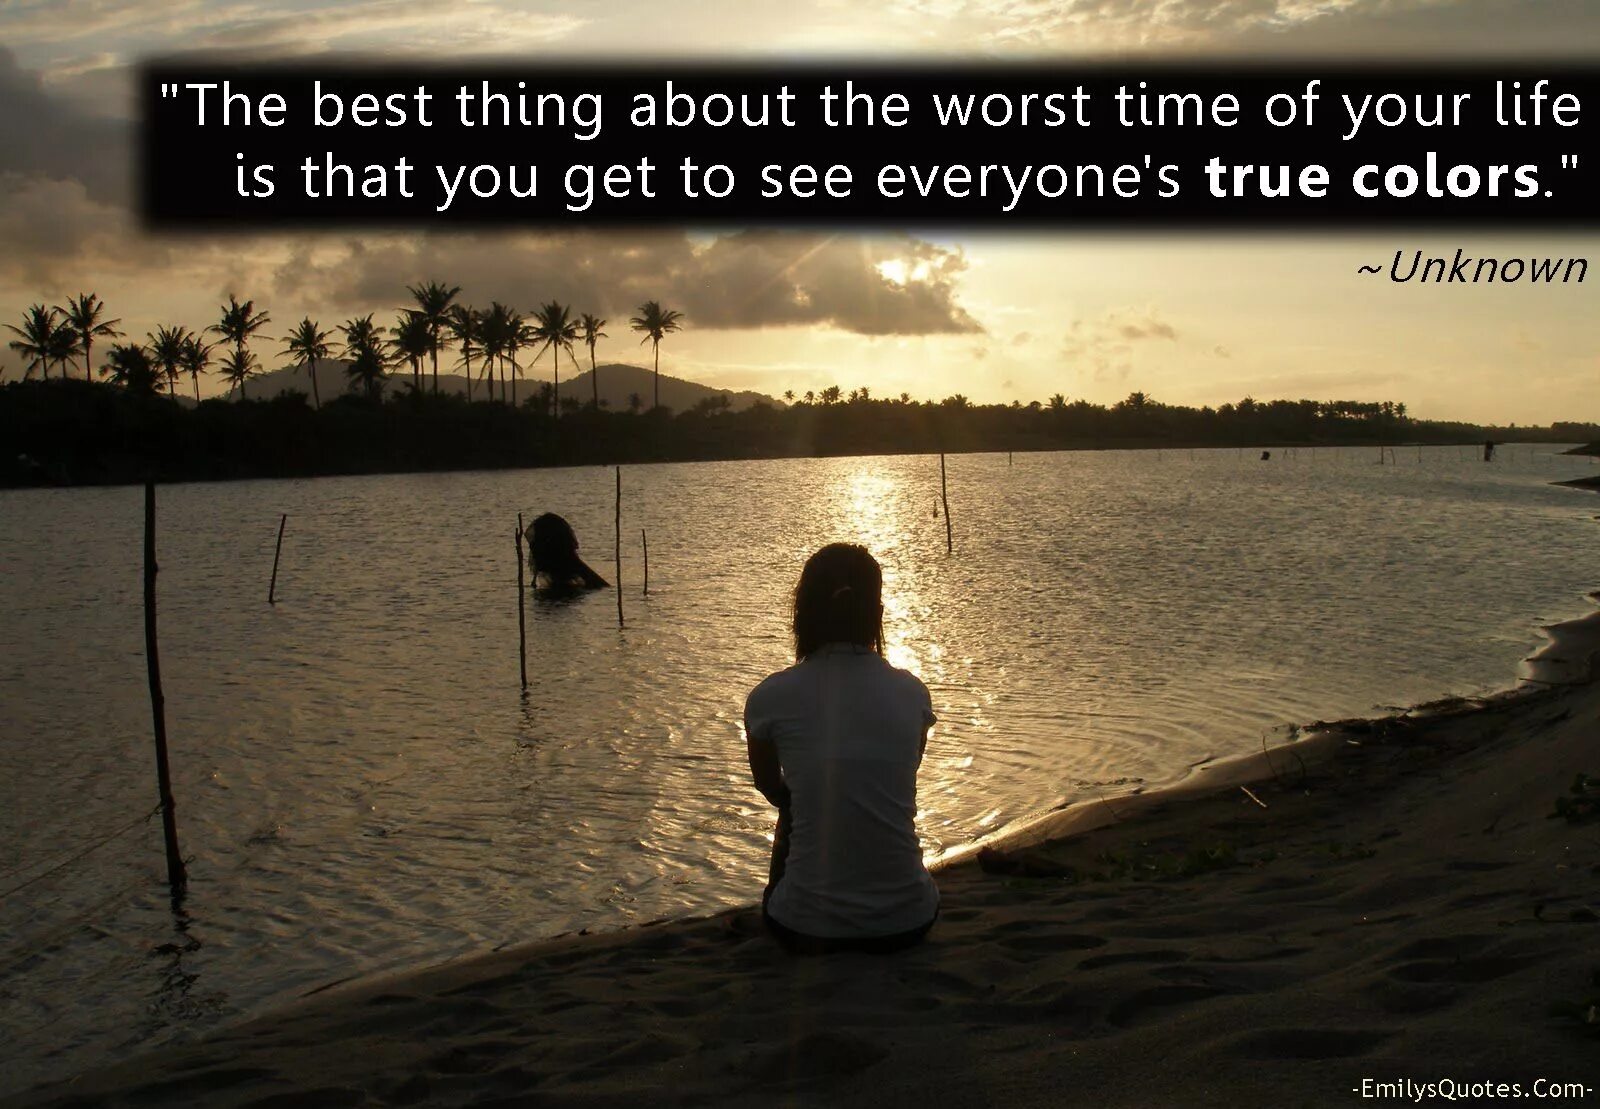 The best thing. The best thing is you. Thing about. Things about your Life. See everyone s